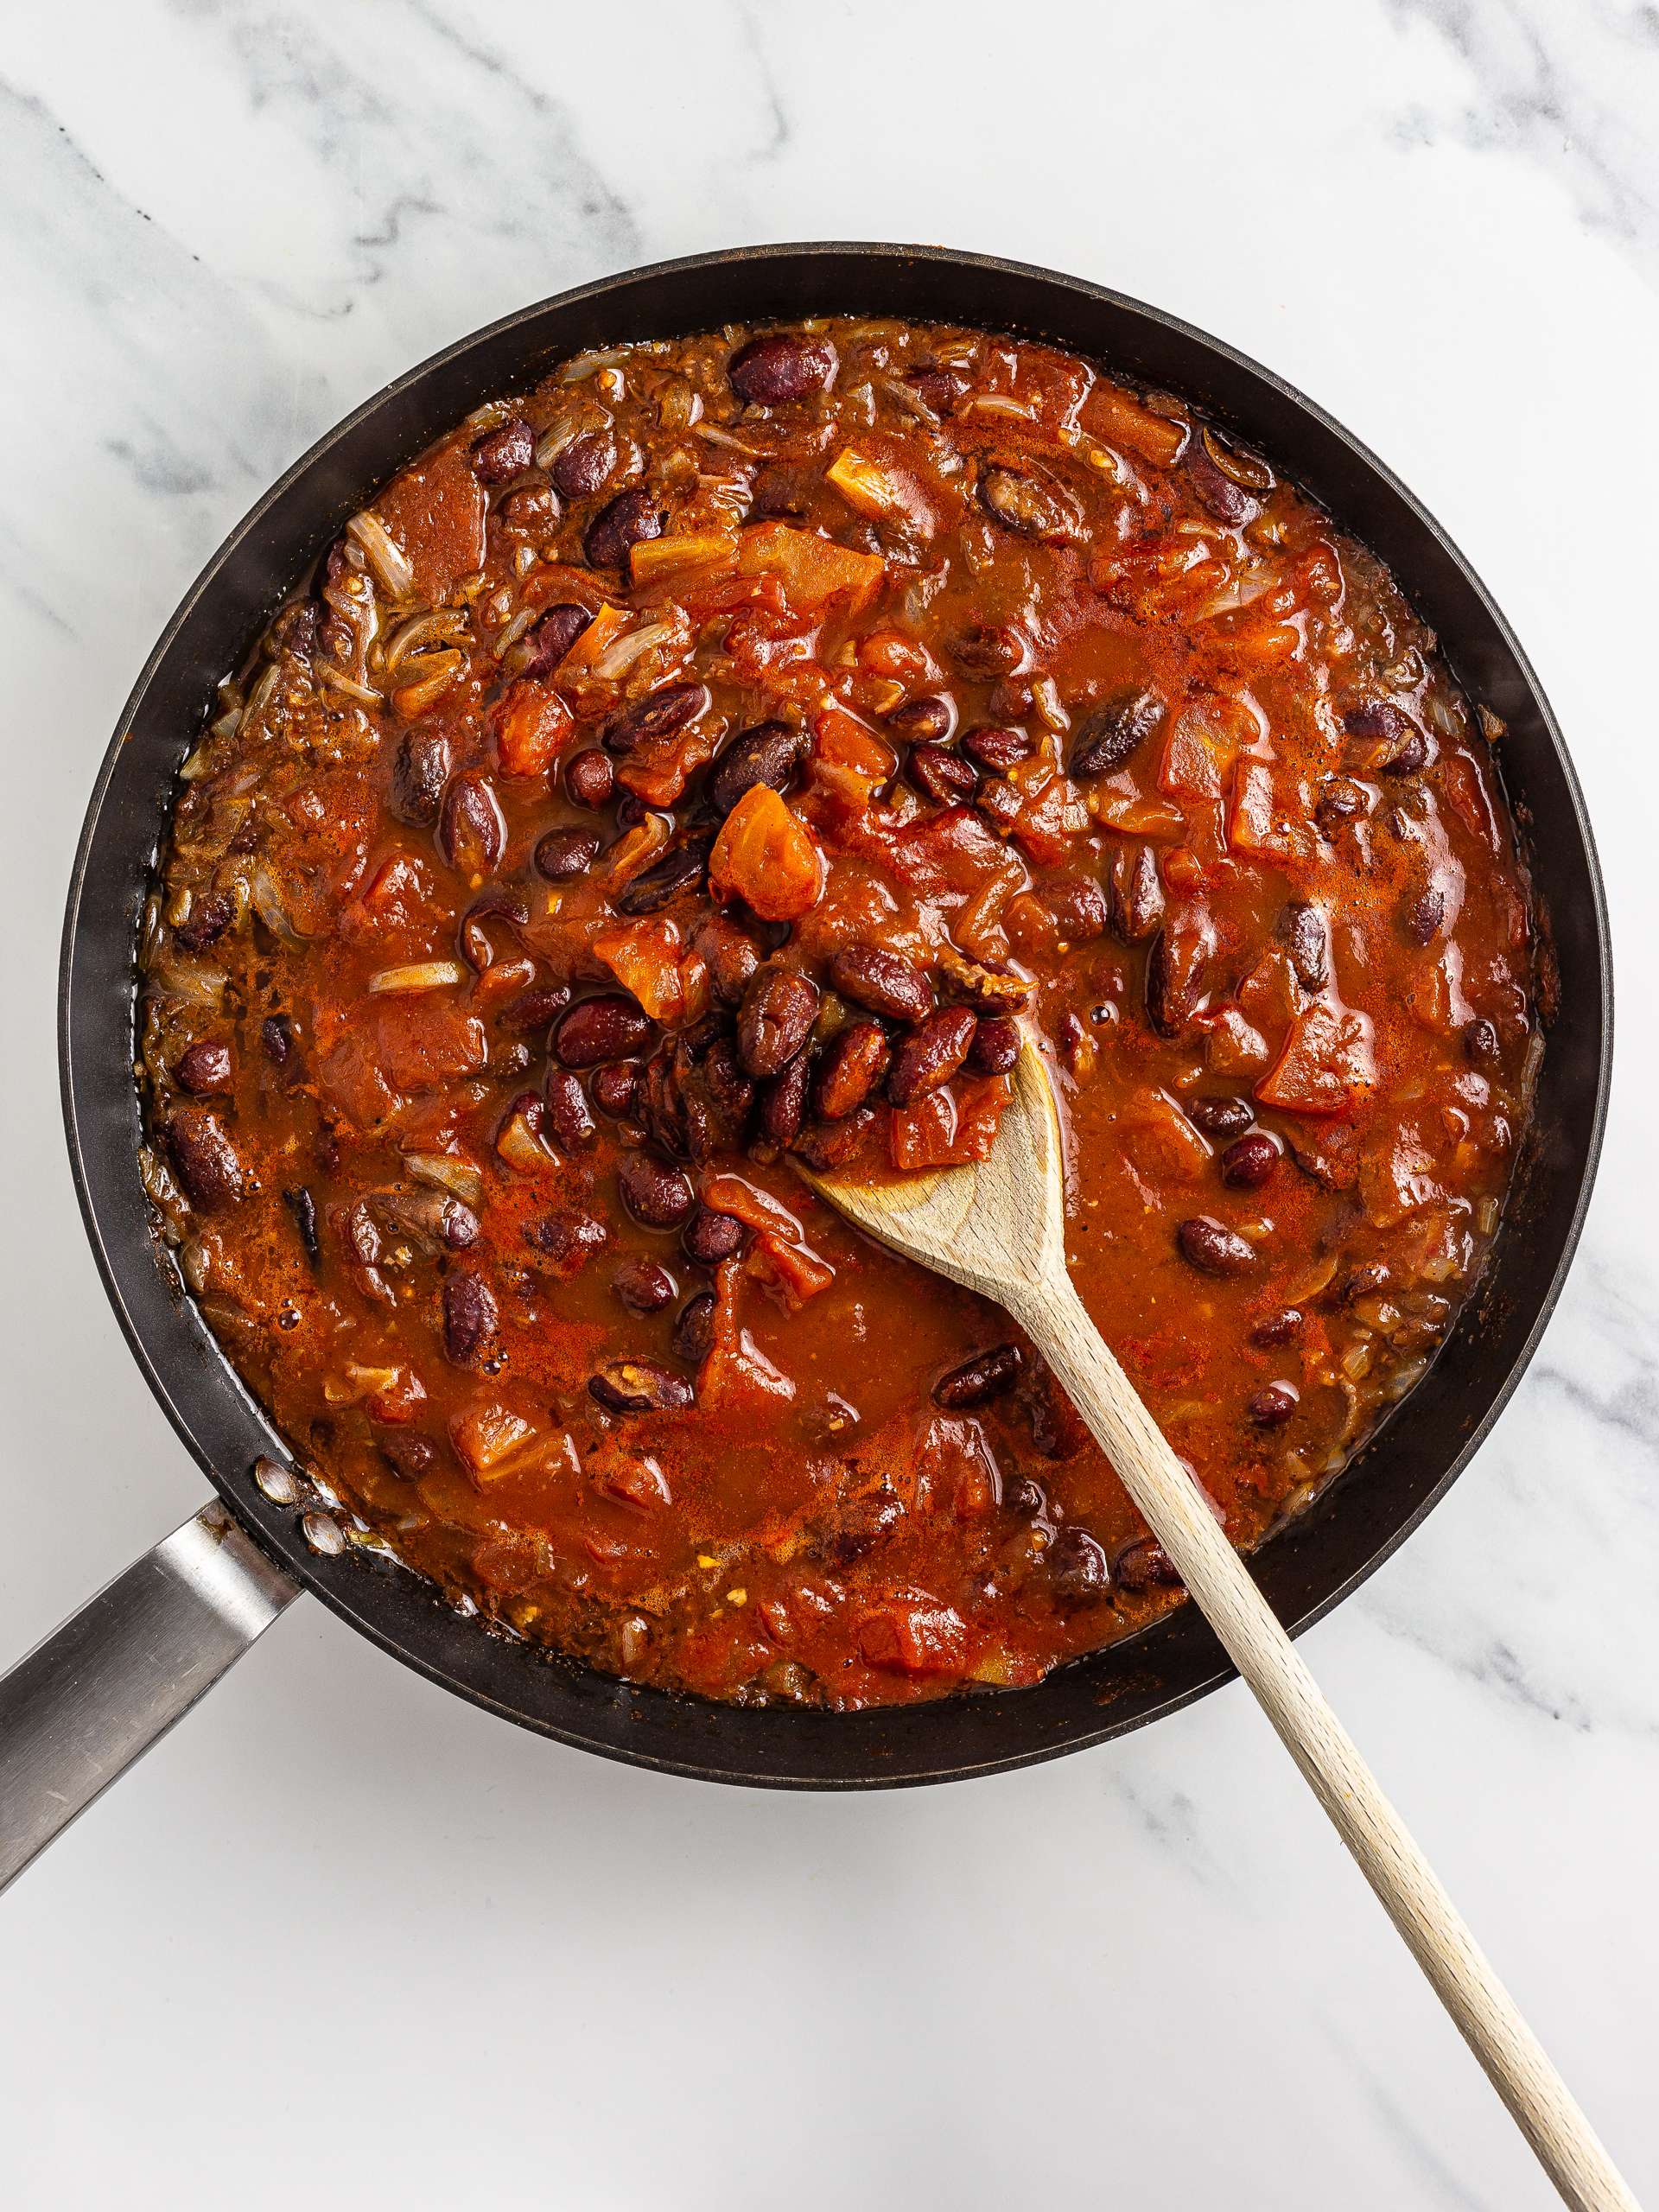 red kidney beans and tomato stew